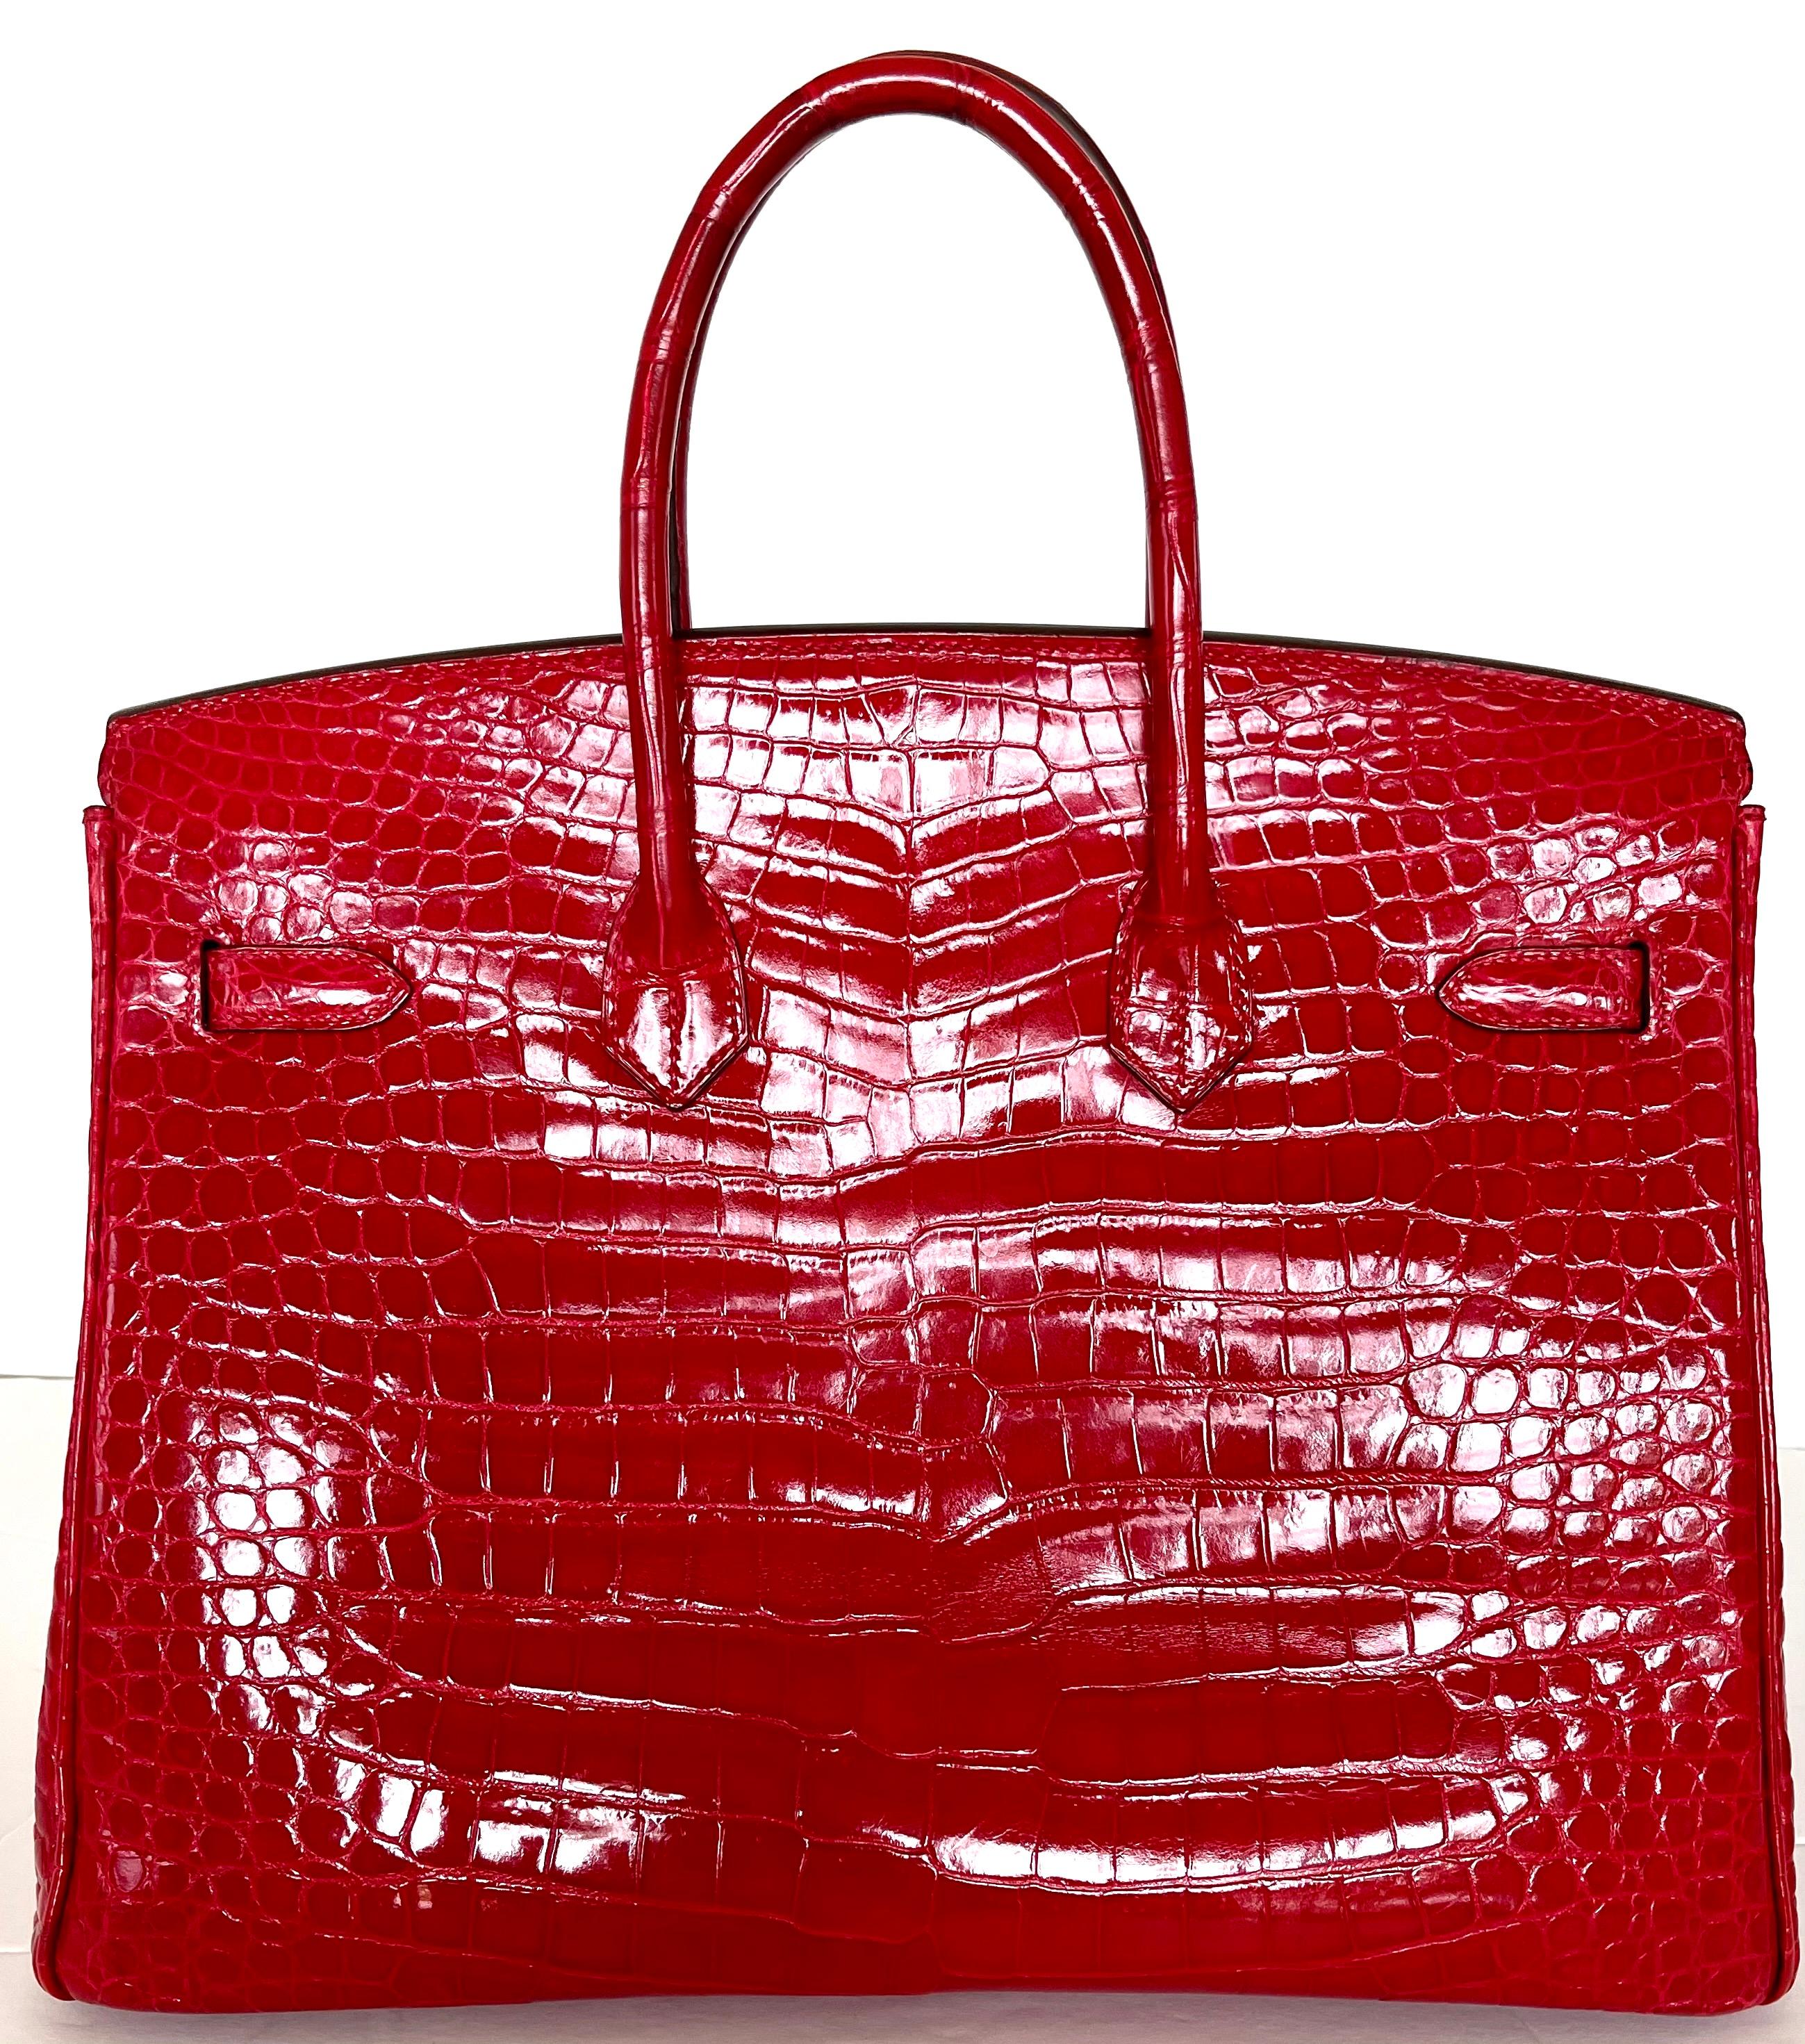 This Birkin is in Braise Shiny Porosus crocodile with gold hardware and has tonal stitching, a front toggle closure, a clochette with lock and two keys, and double rolled handles.

 

The interior is lined with chevre and has one zip pocket with an